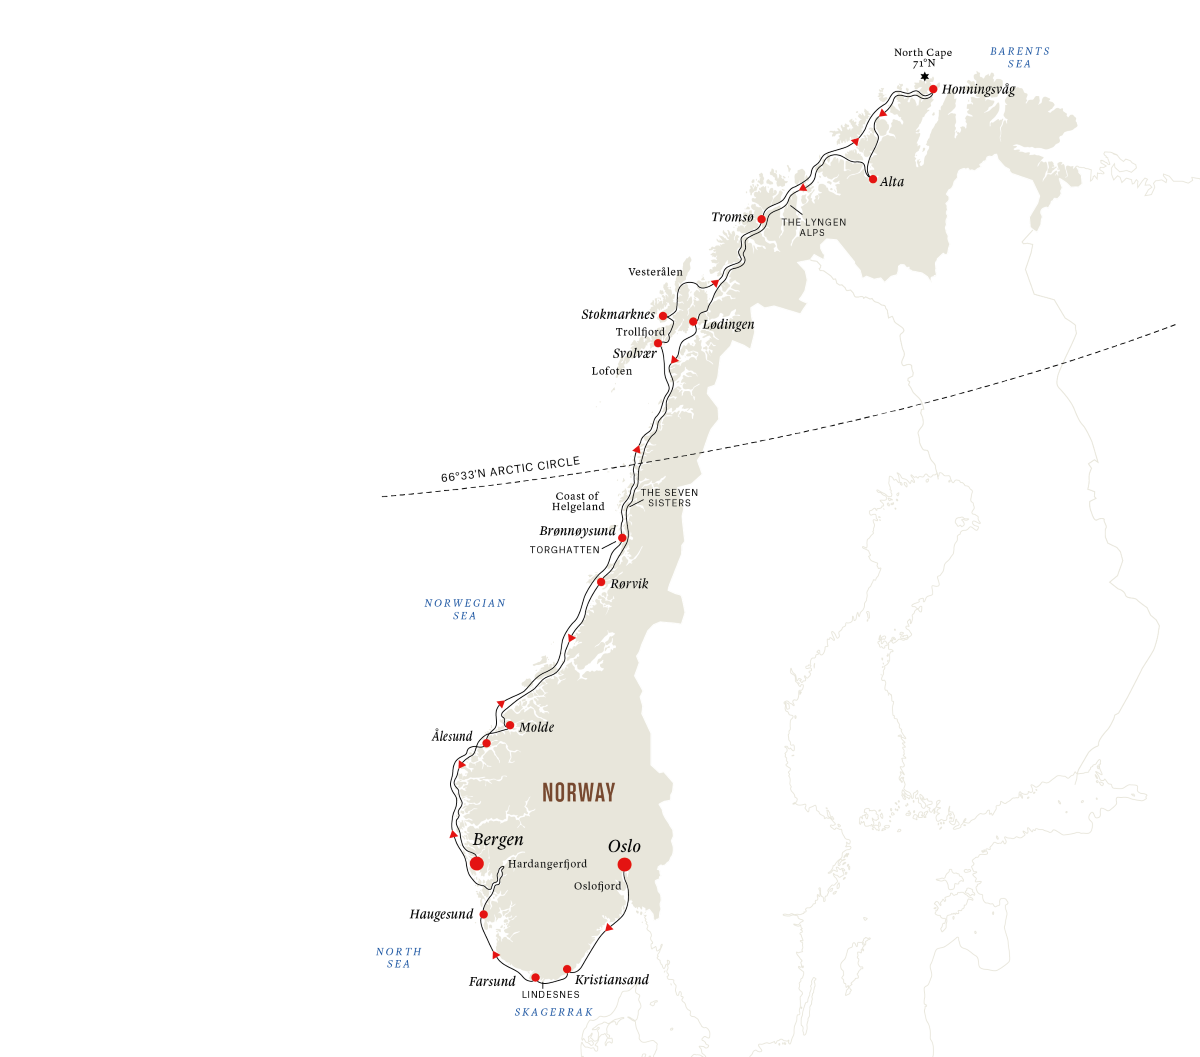 The North Cape Express – Full Voyage from Oslo